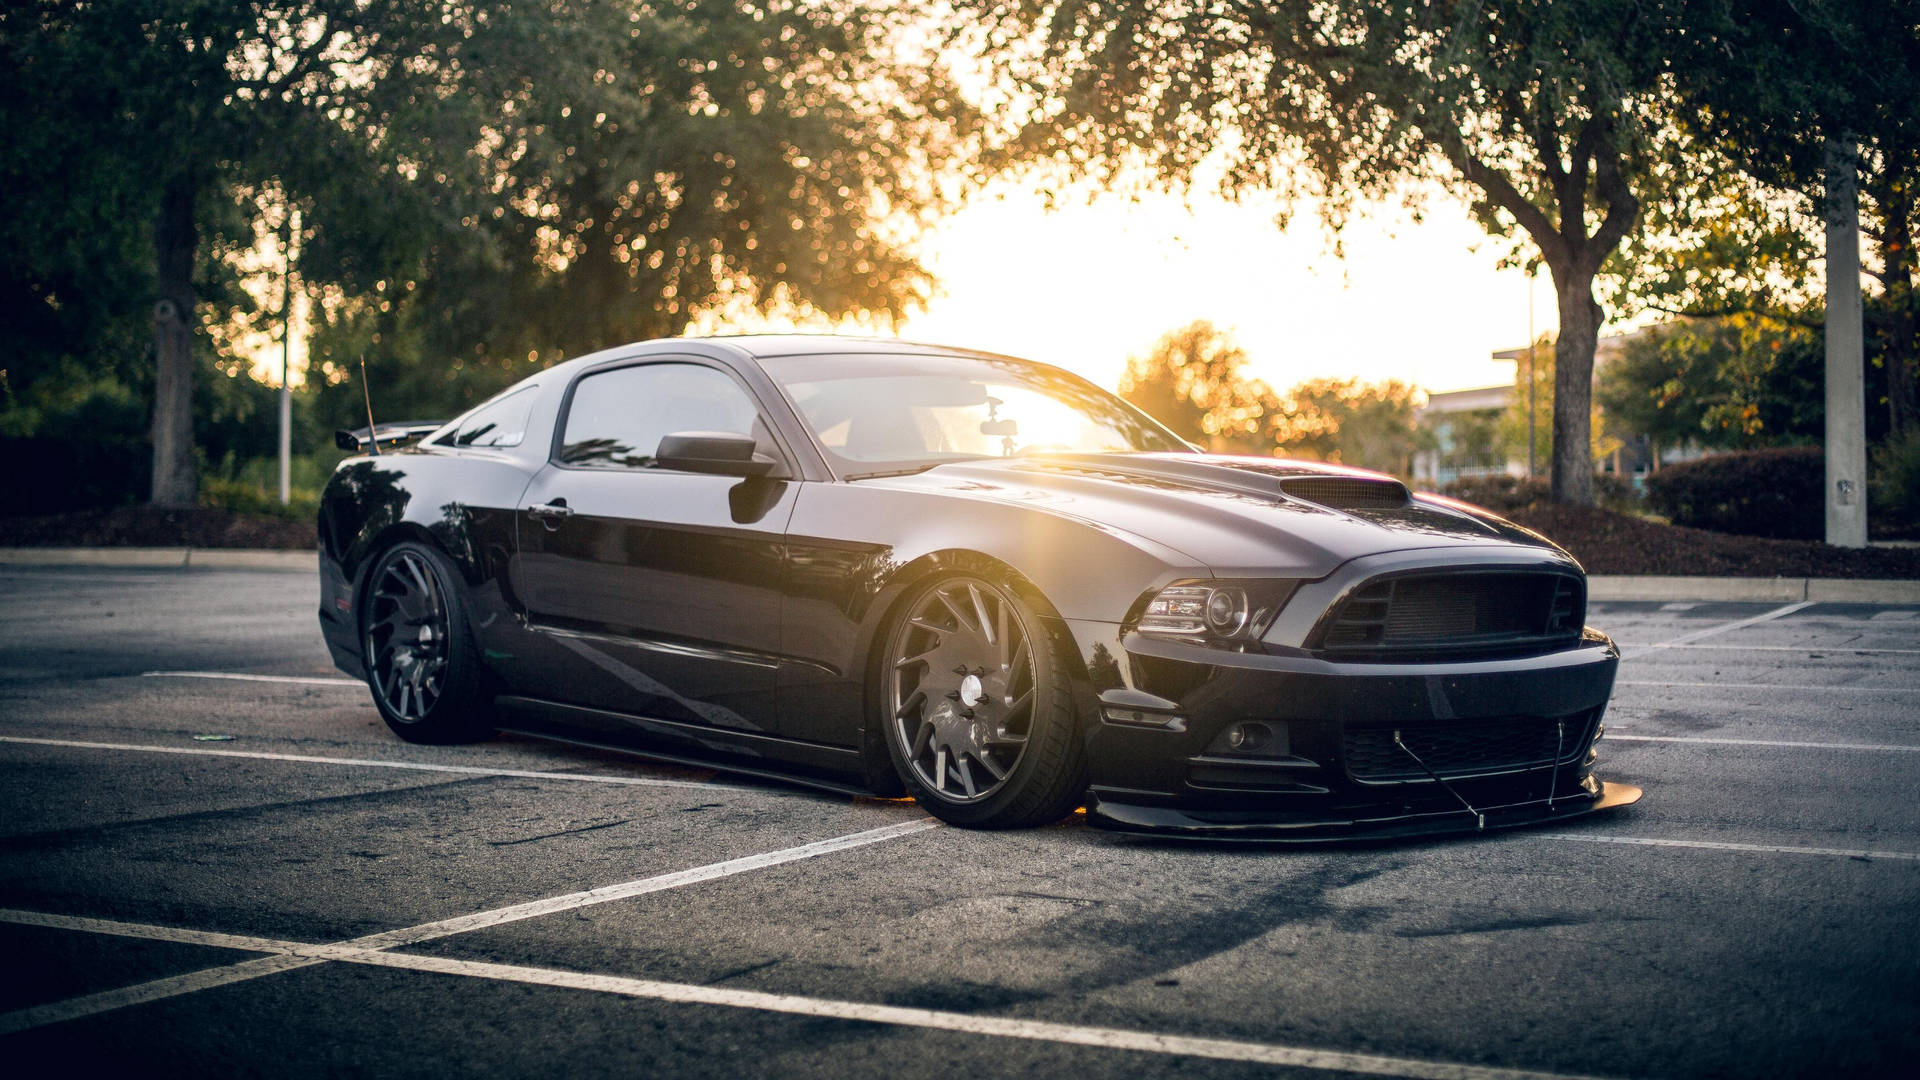 Black Ford Mustang Shelby Background